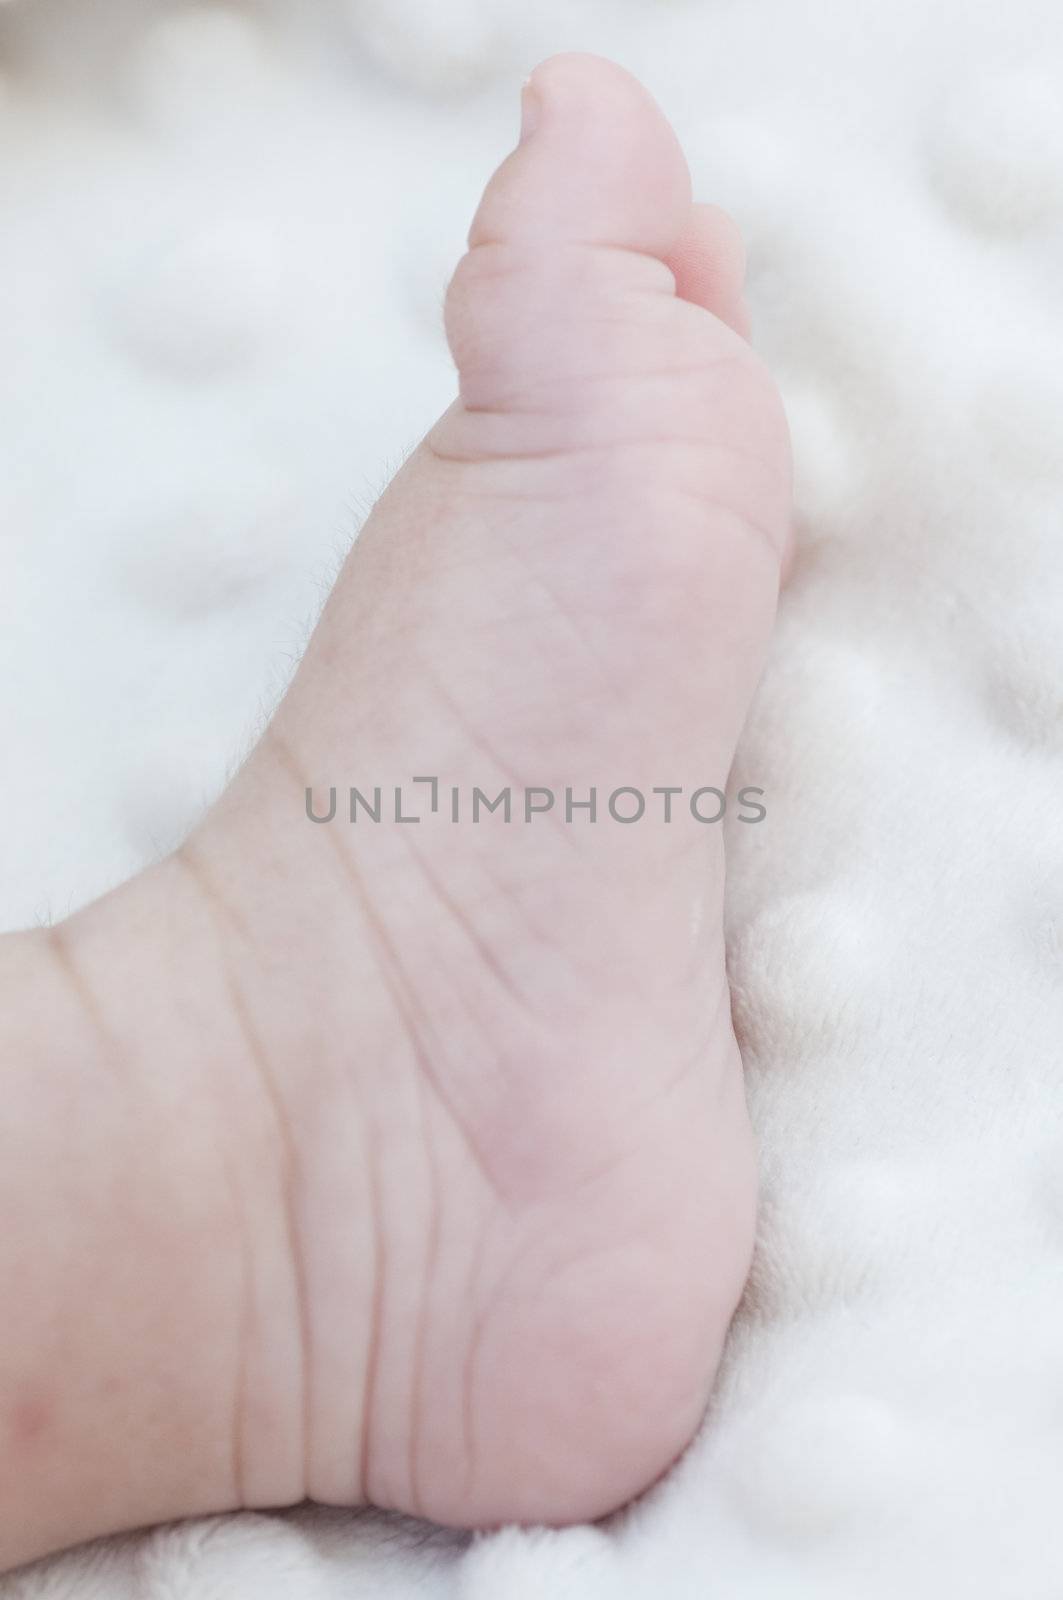 Picture of a new born foot.